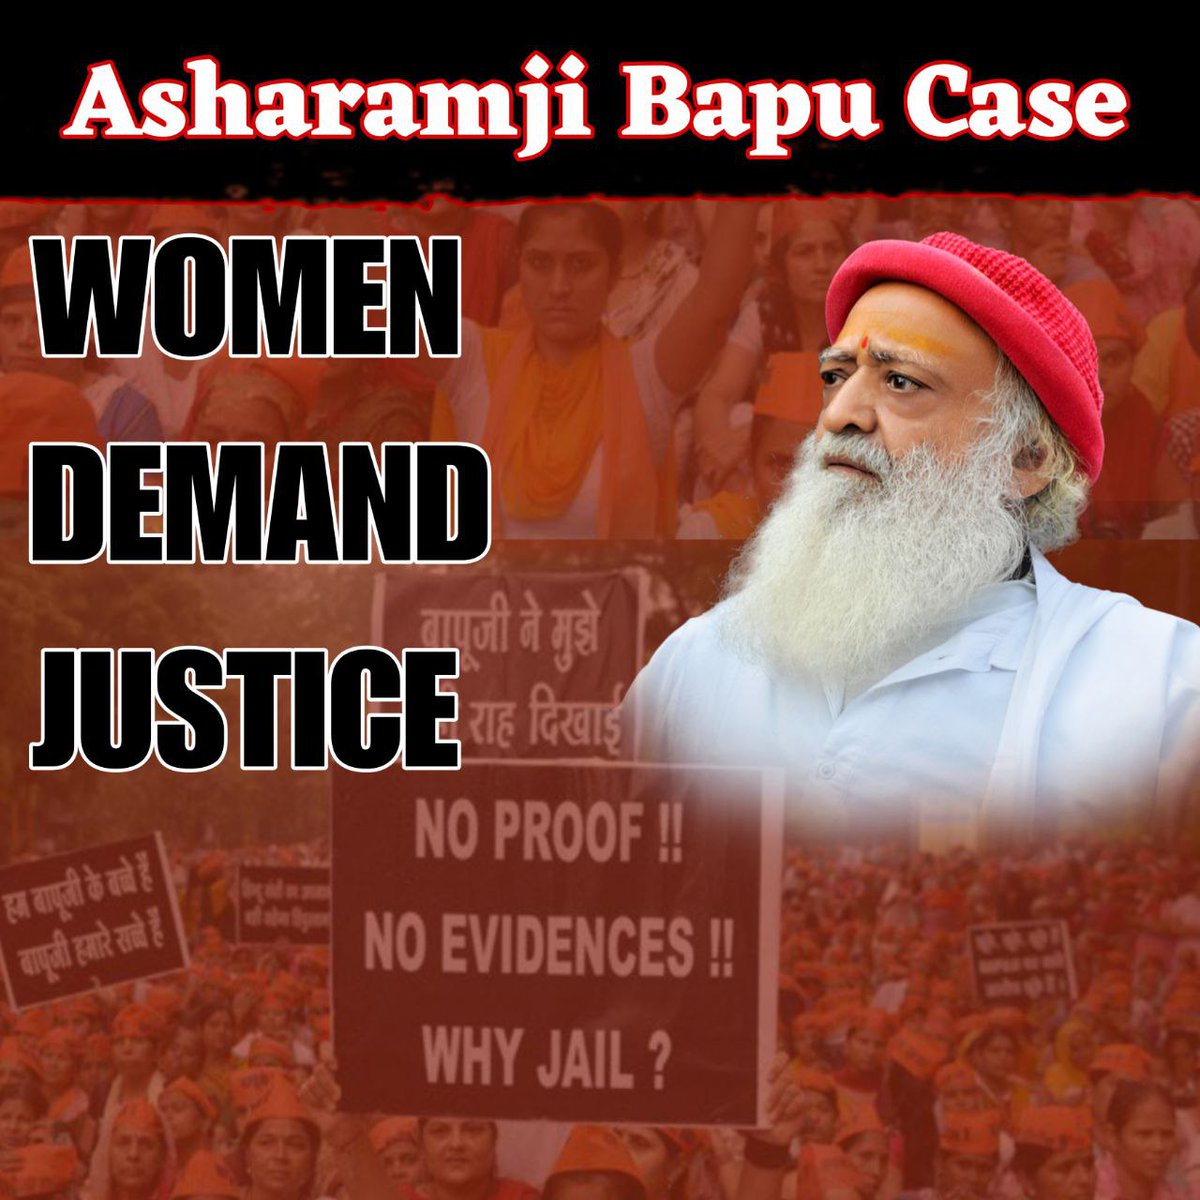 @NigamKu72127489 @krishan62744536 @YssSpeaks No evidences, no proofs against Sant Shri Asharamji Bapu in this bogus case. It has been 10 years and no relief even for a single day. 
When will govt listen to #करोड़ों_महिलाओं_की_पुकार ?
Women Demand Fair Proceeding ASAP!
youtube.com/watch?v=n7NvcI…